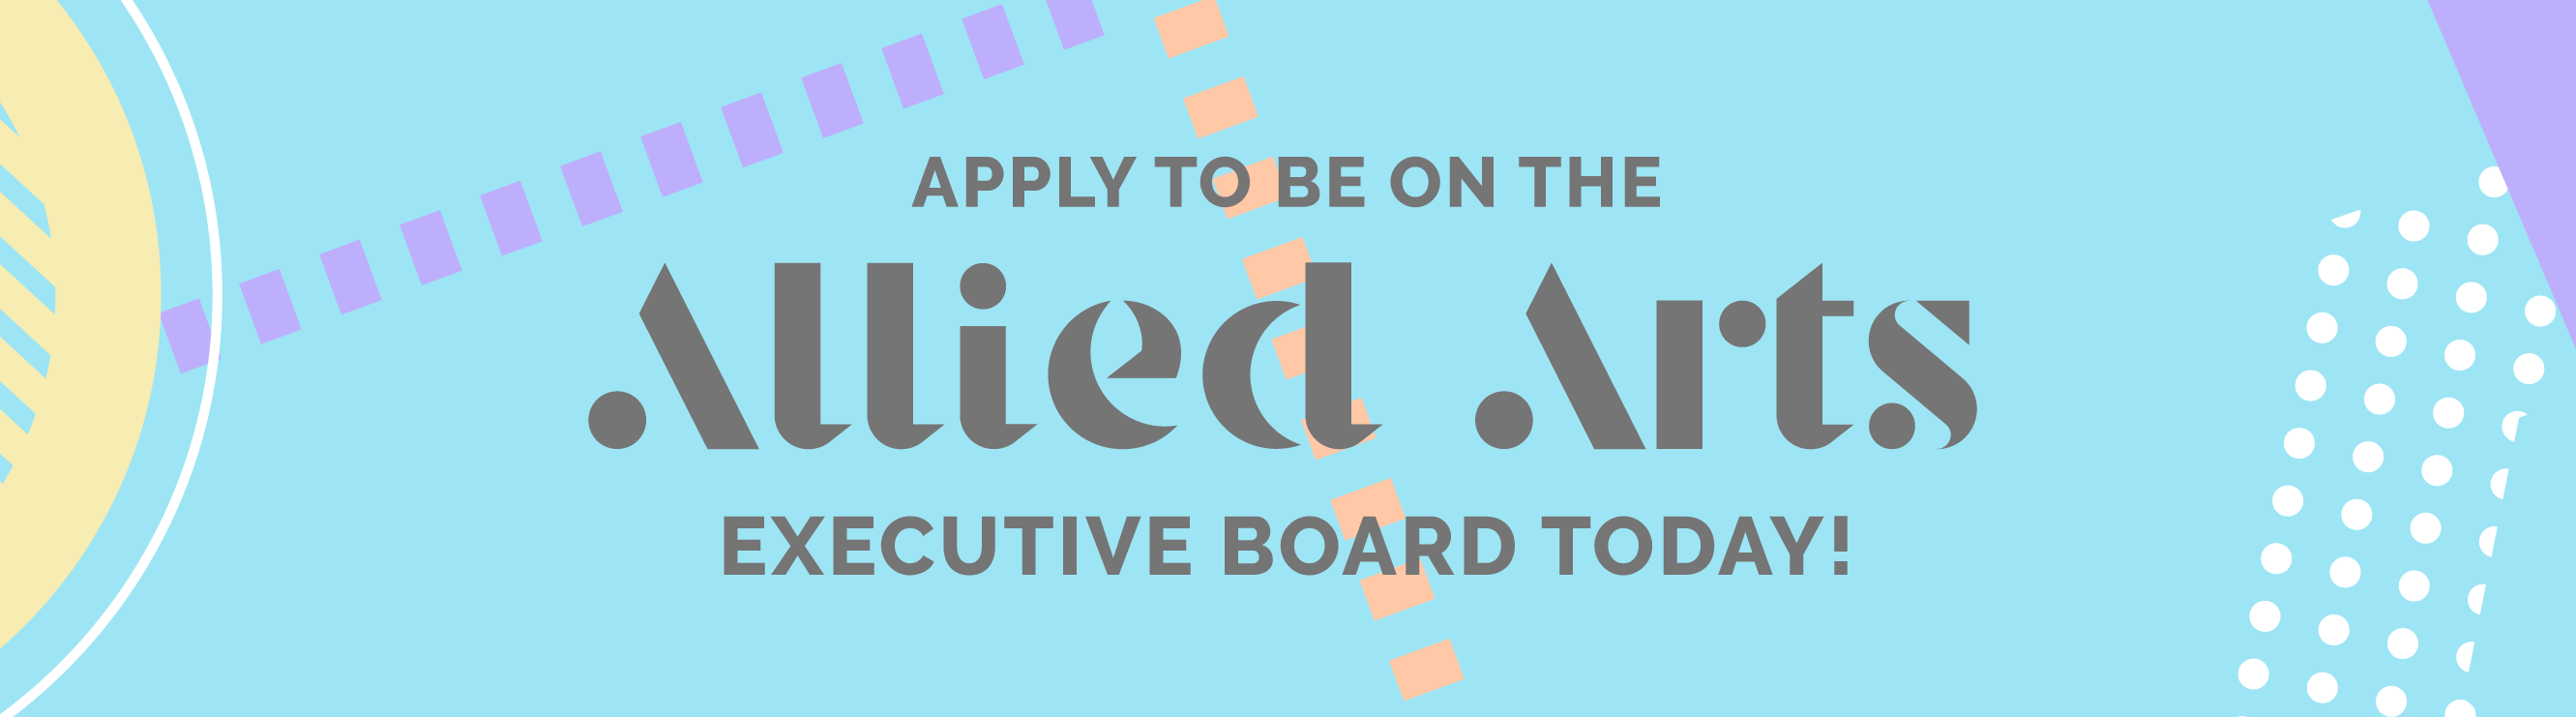 Join the Allied Arts Executive Board today!